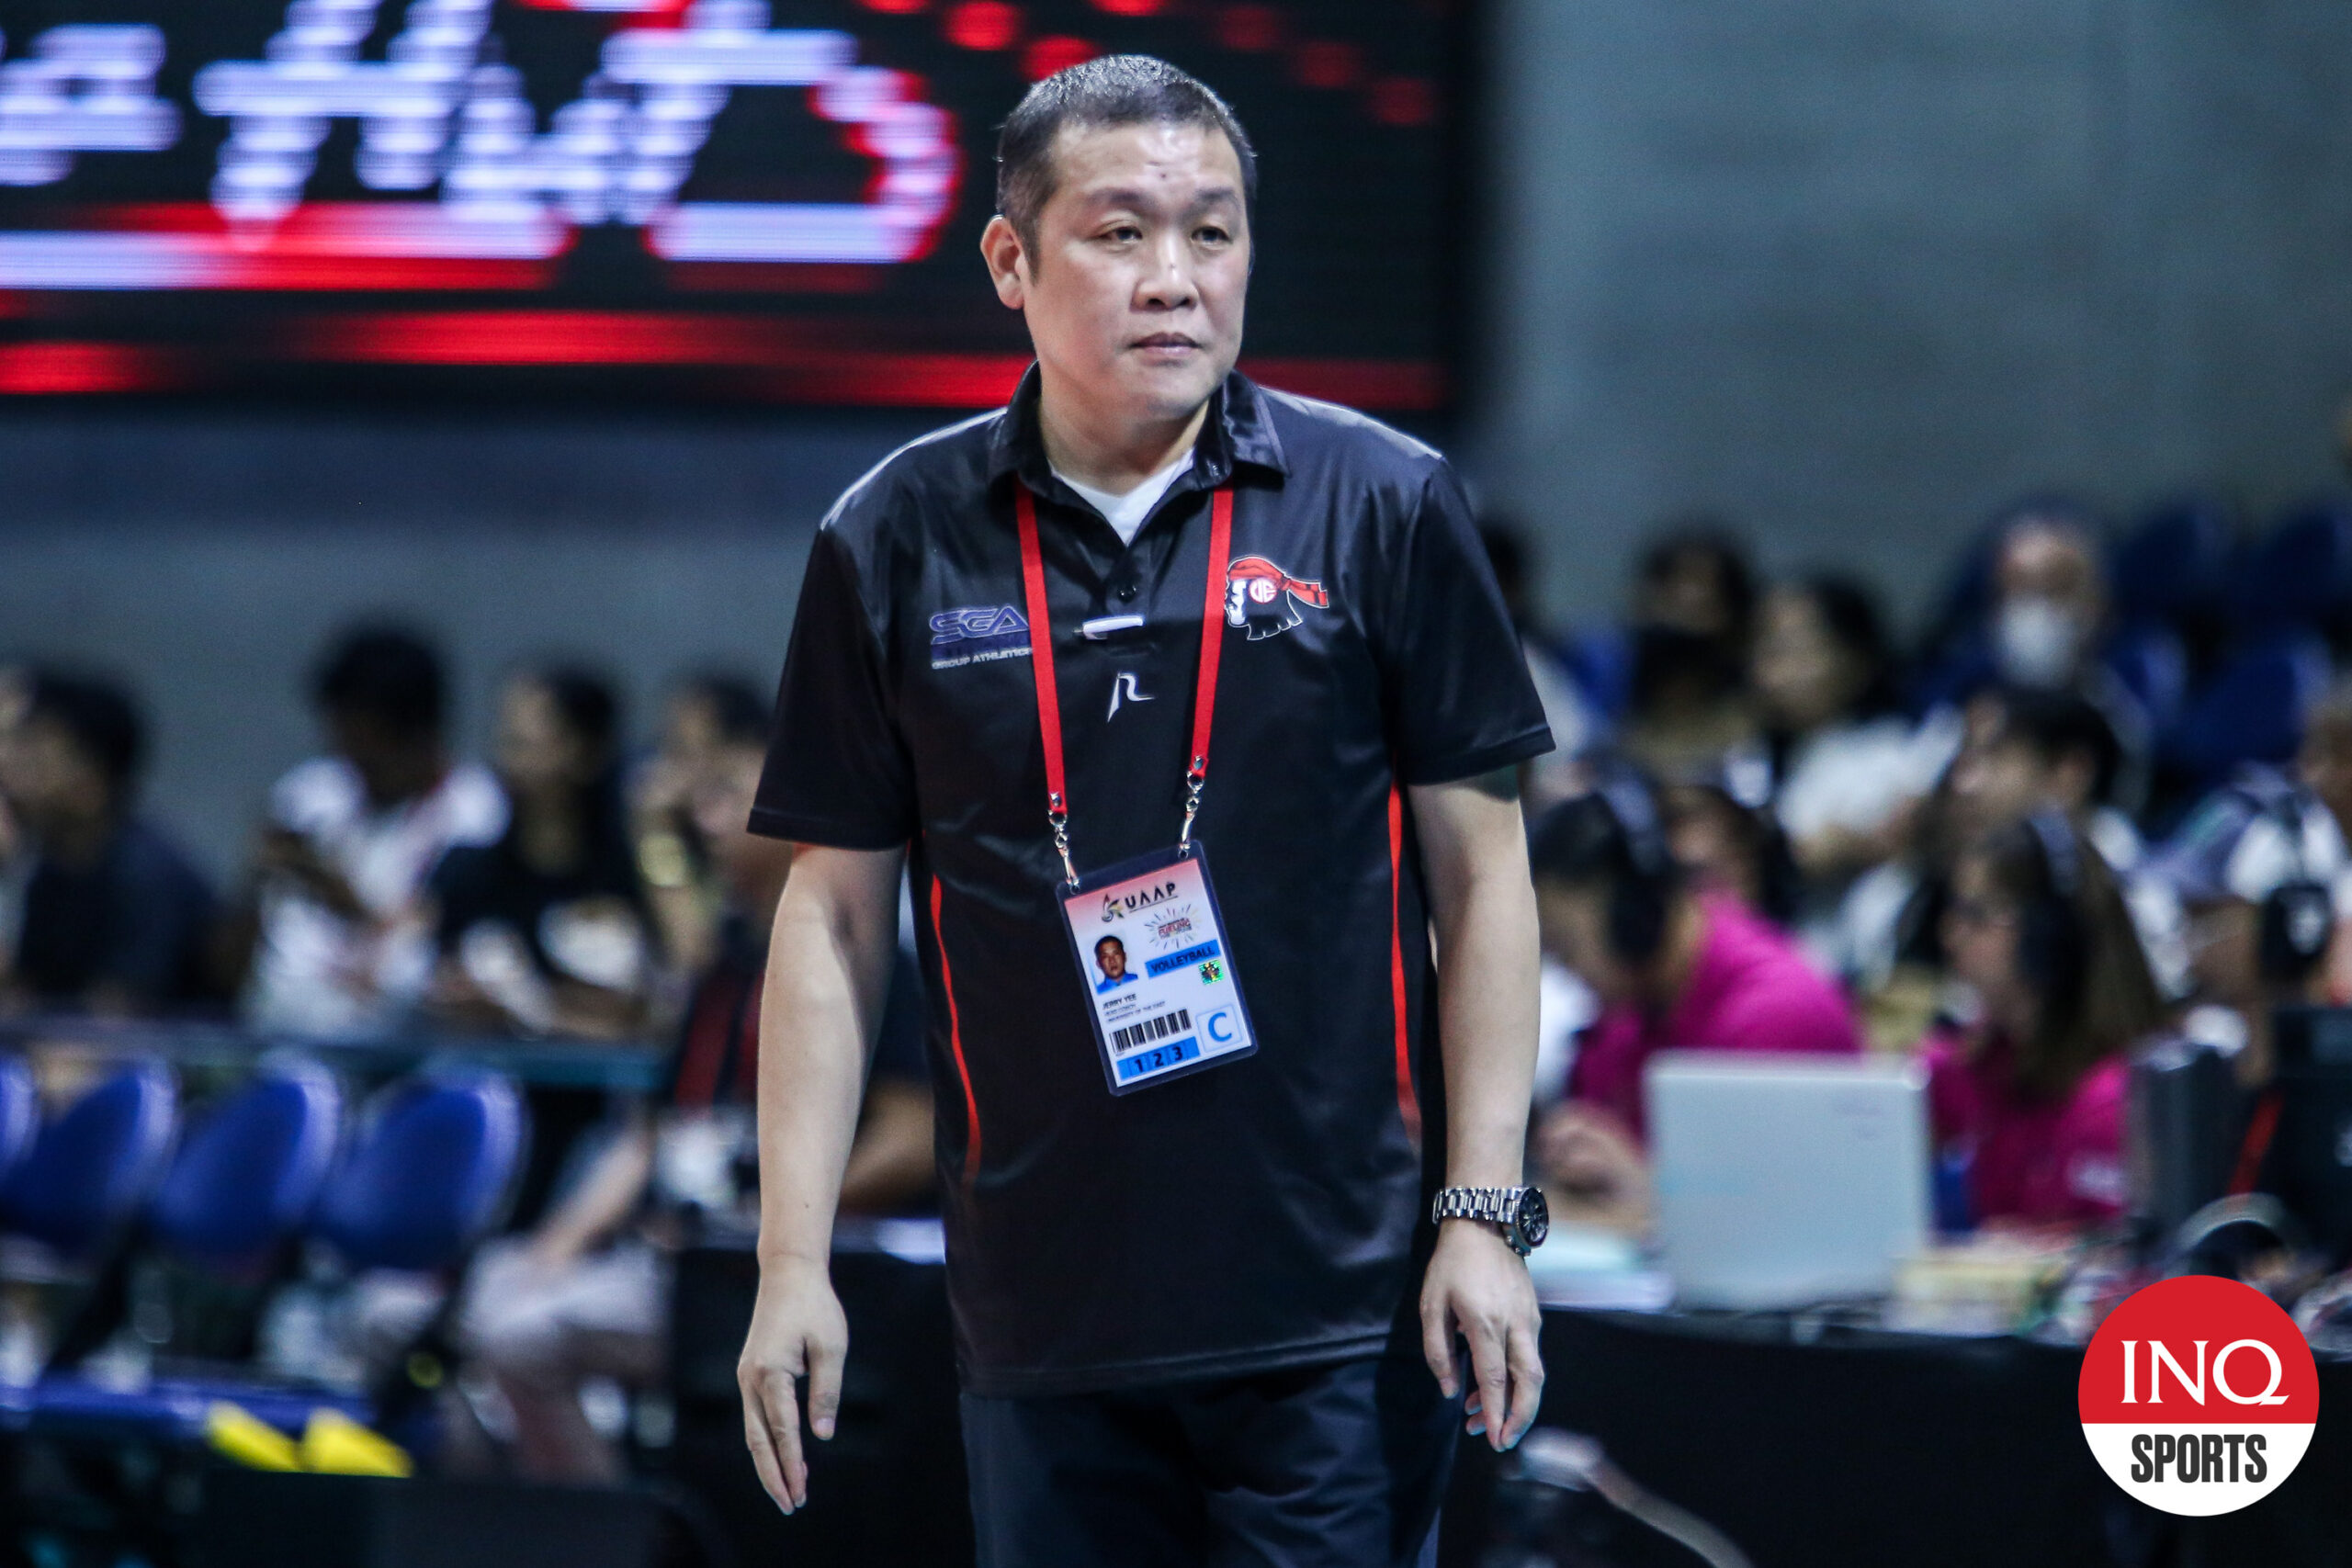 uaap suspends coach jerry yee for rest of season; ue to appeal